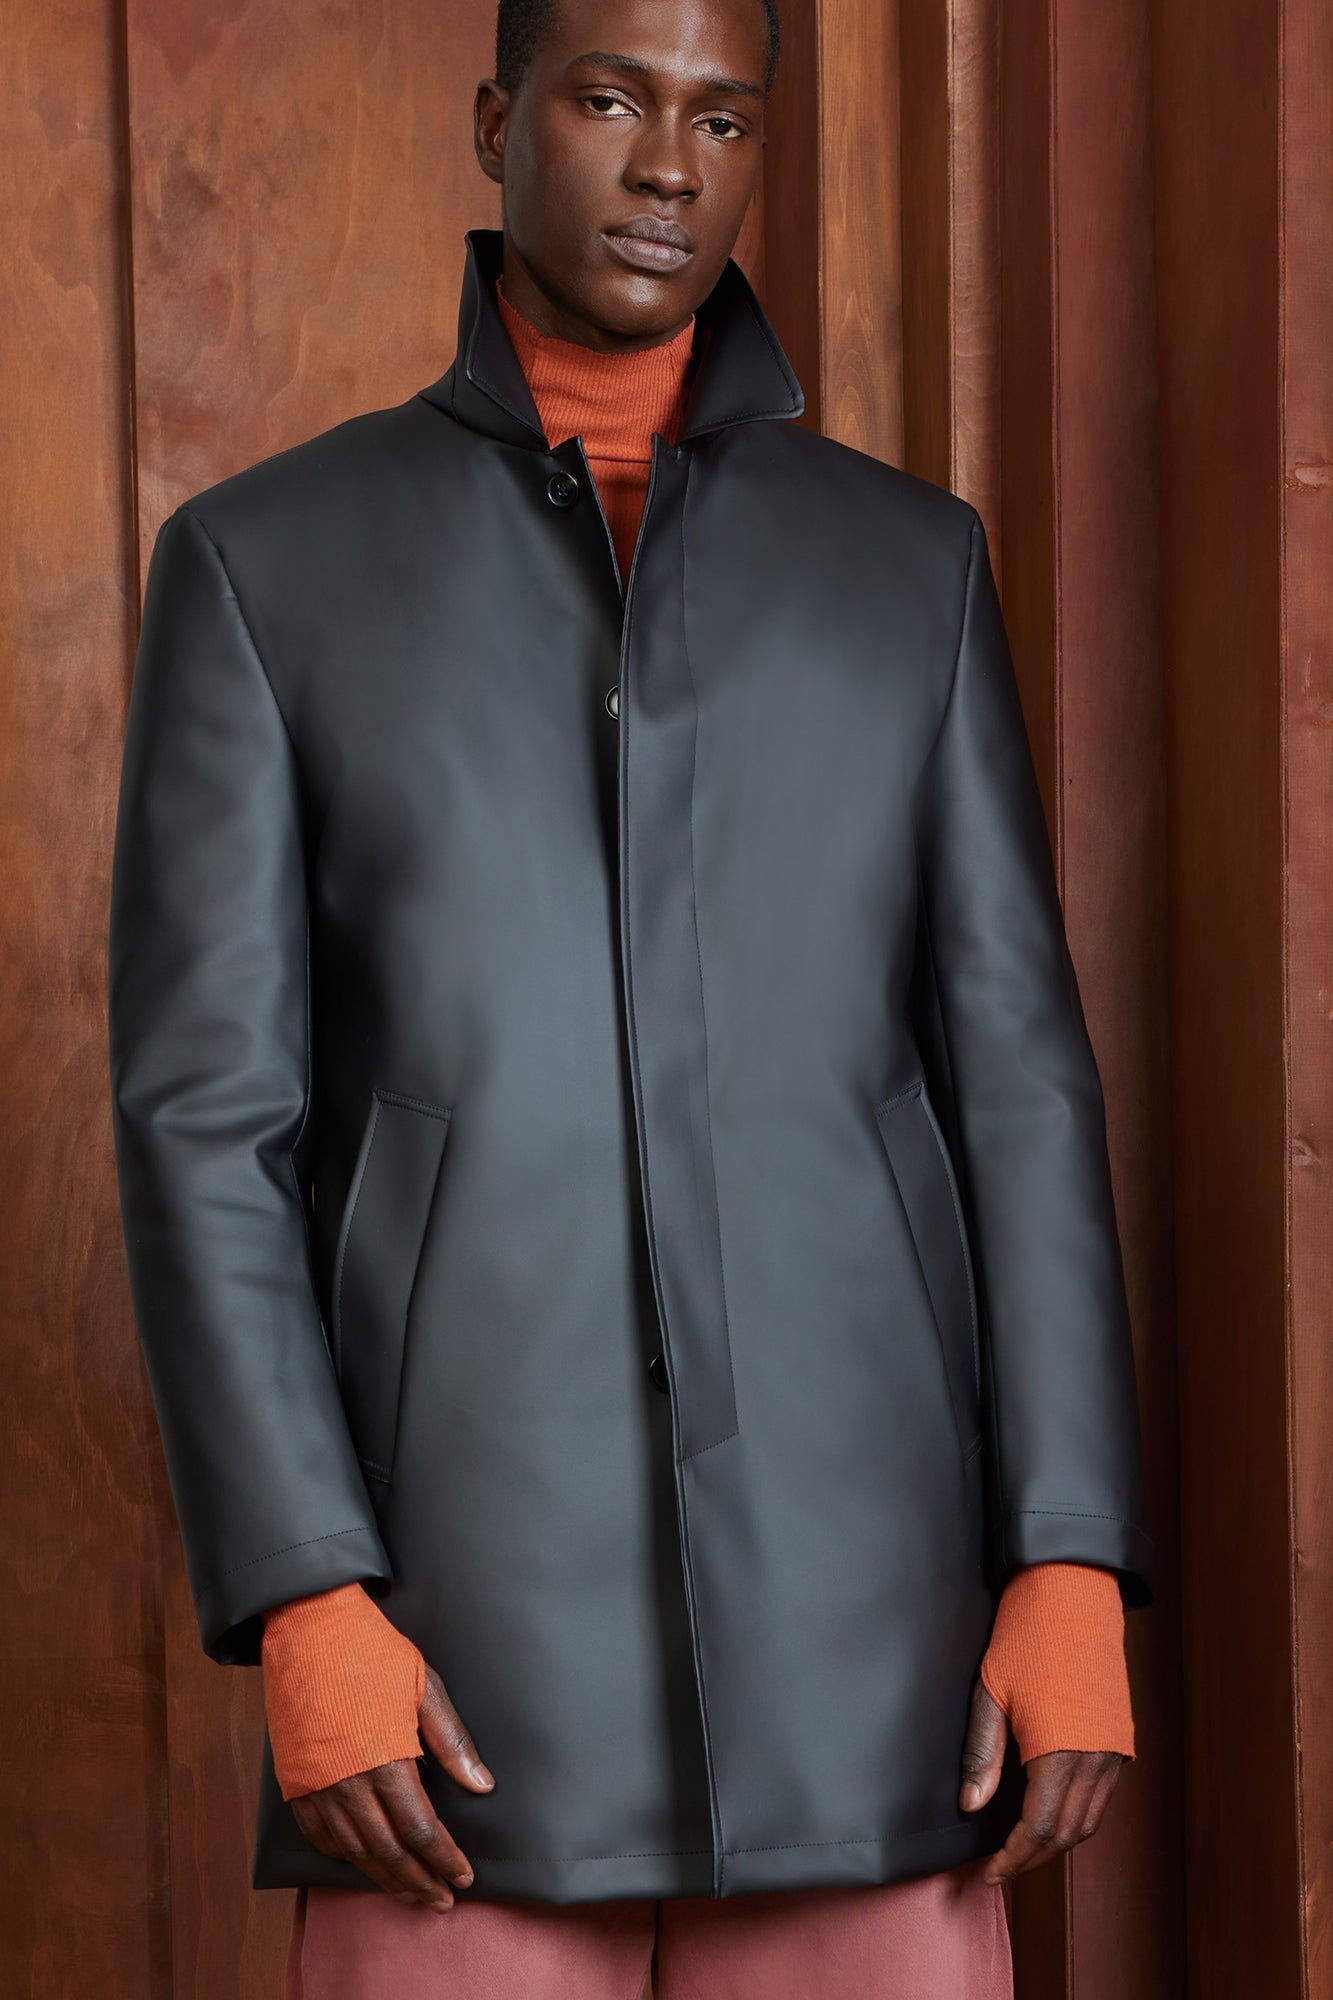 LIMITED EDITION: SCOTTY BLACK TOPCOAT - MENS - Cardinal of Canada-US-SCOTTY BLACK TOPCOAT 36.5 inch length